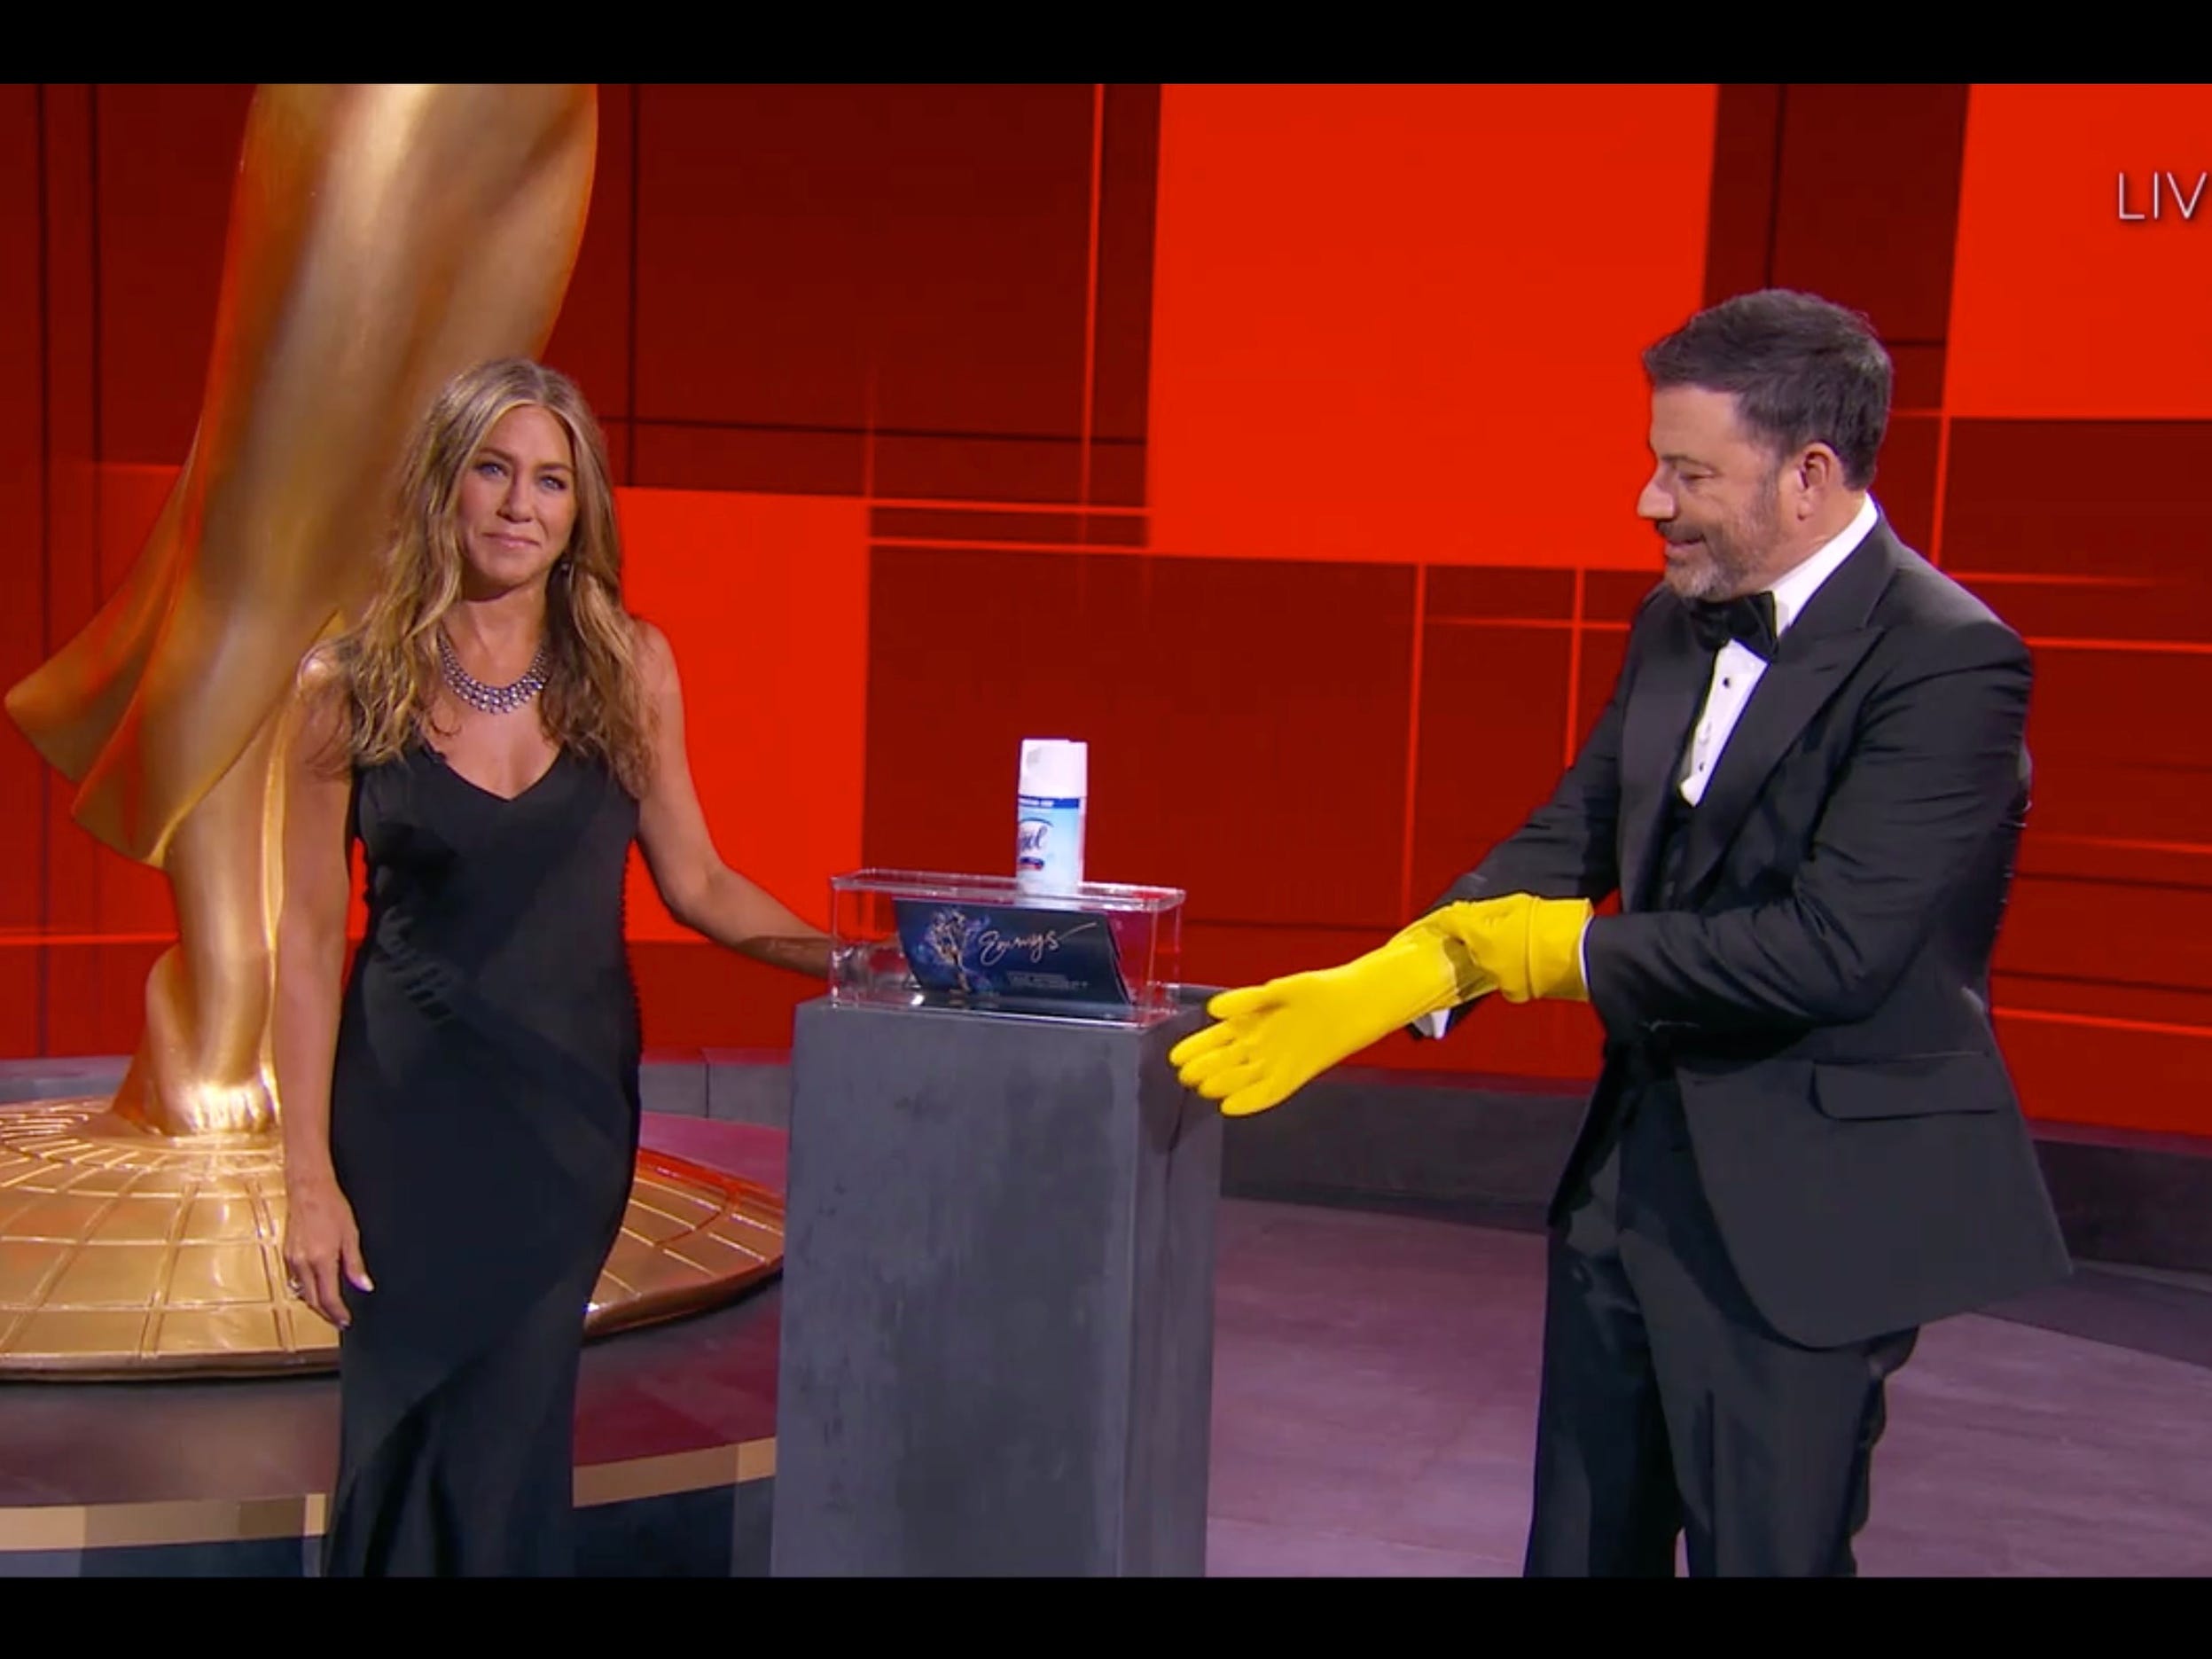 Jennifer Aniston presenting the award for outstanding lead actress in a comedy series alongside host Jimmy Kimmel.